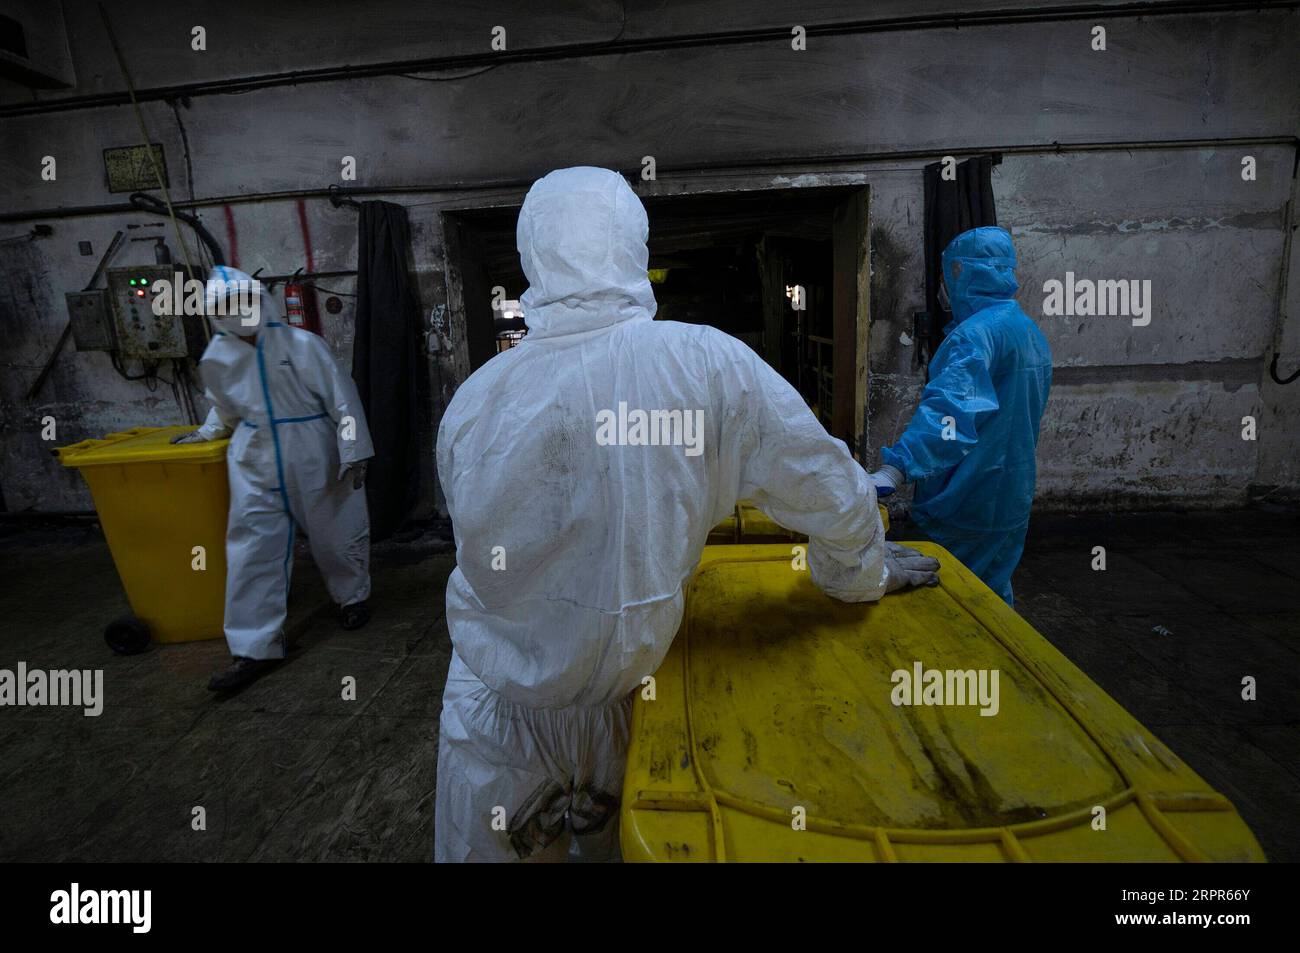 200327 -- WUHAN, March 27, 2020 -- Wang Peng C and his colleagues work at a medical waste treatment company in Wuhan, central China s Hubei Province, March 26, 2020. Wang Peng, 35, has been working for the Wuhan Hanshi Environmental Engineering Company for 9 years, where he is responsible for the disposal and incineration of medical waste. Protection against infection is a major challenge that Wang and his coworkers face, as they work 12-hour shifts to cope with the surging workload during the COVID-19 outbreak. I like what I m doing, Wang said, I m not only making money for my family, but als Stock Photo